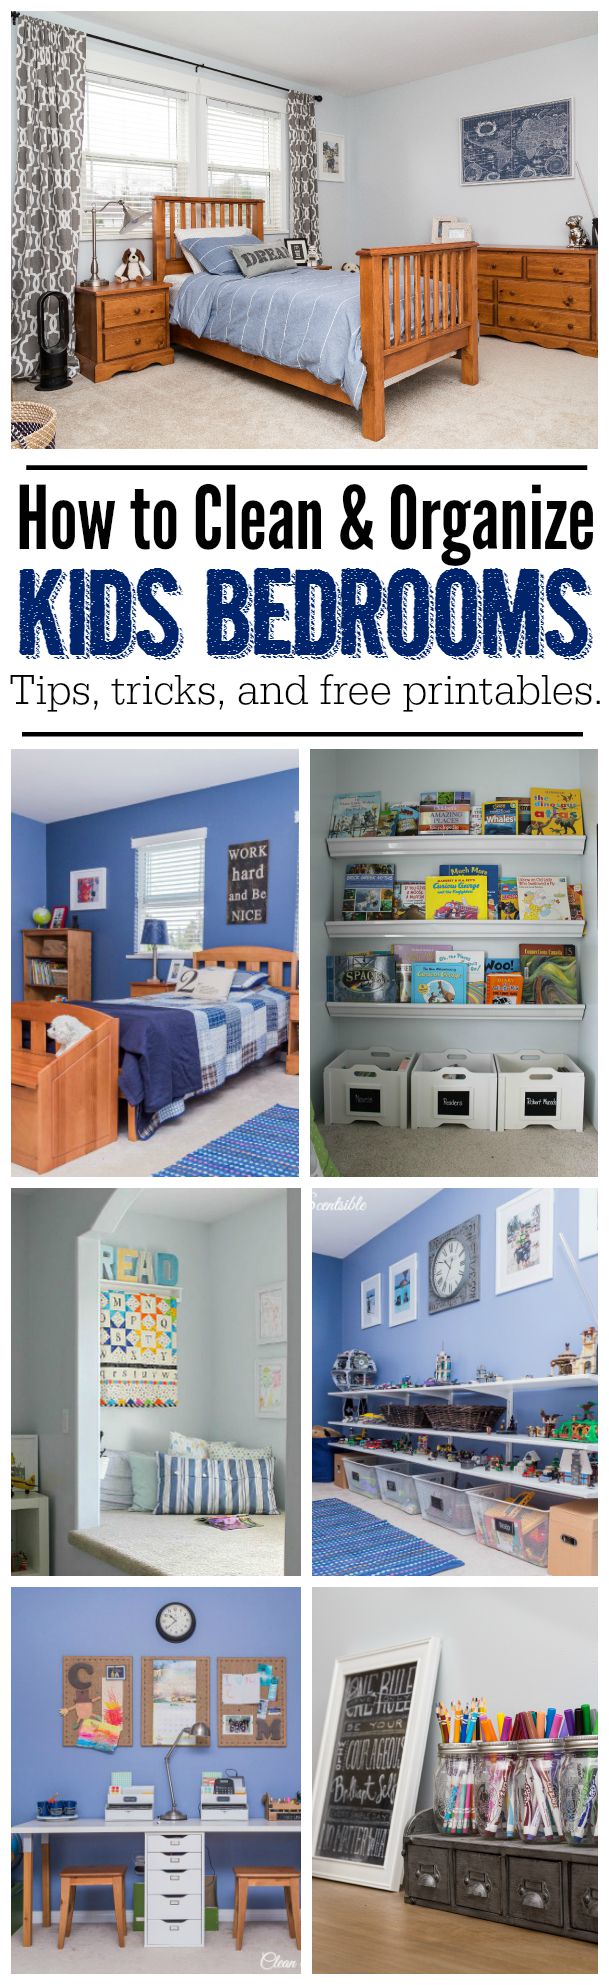 20+ organizing Baby Room - Cool Furniture Ideas Check more at